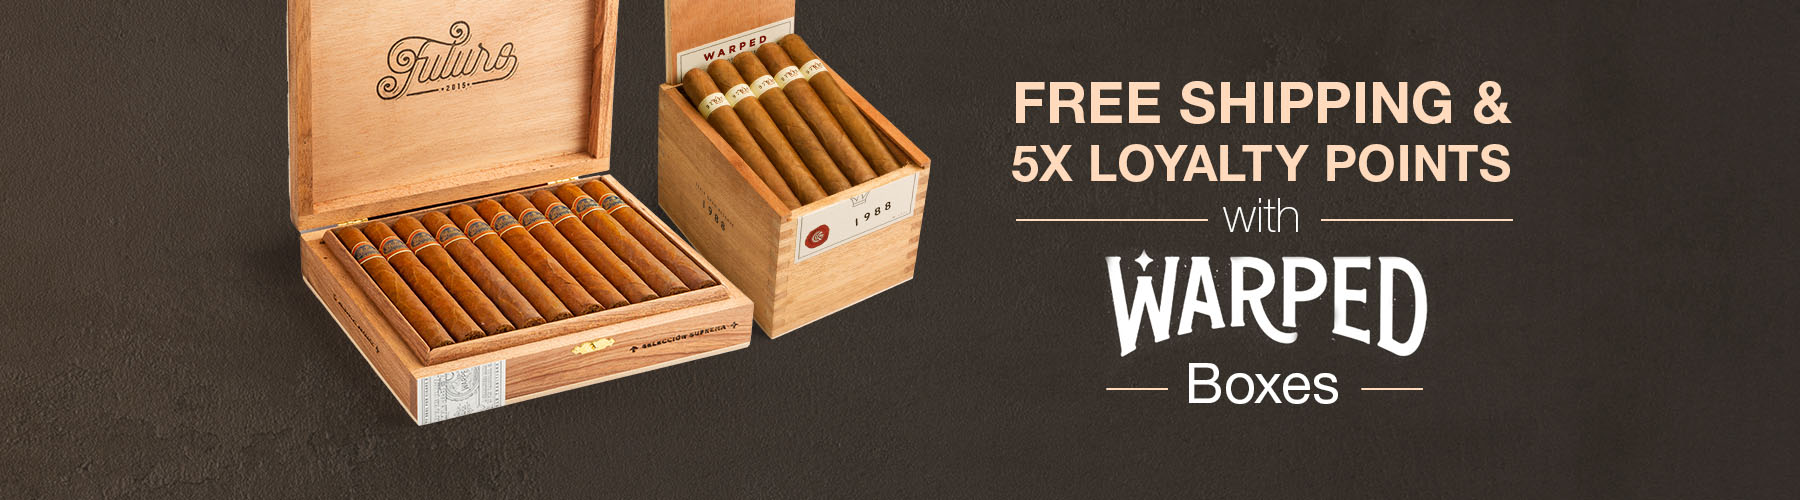 Free Shipping & 5X Loyalty Points with Warped boxes!